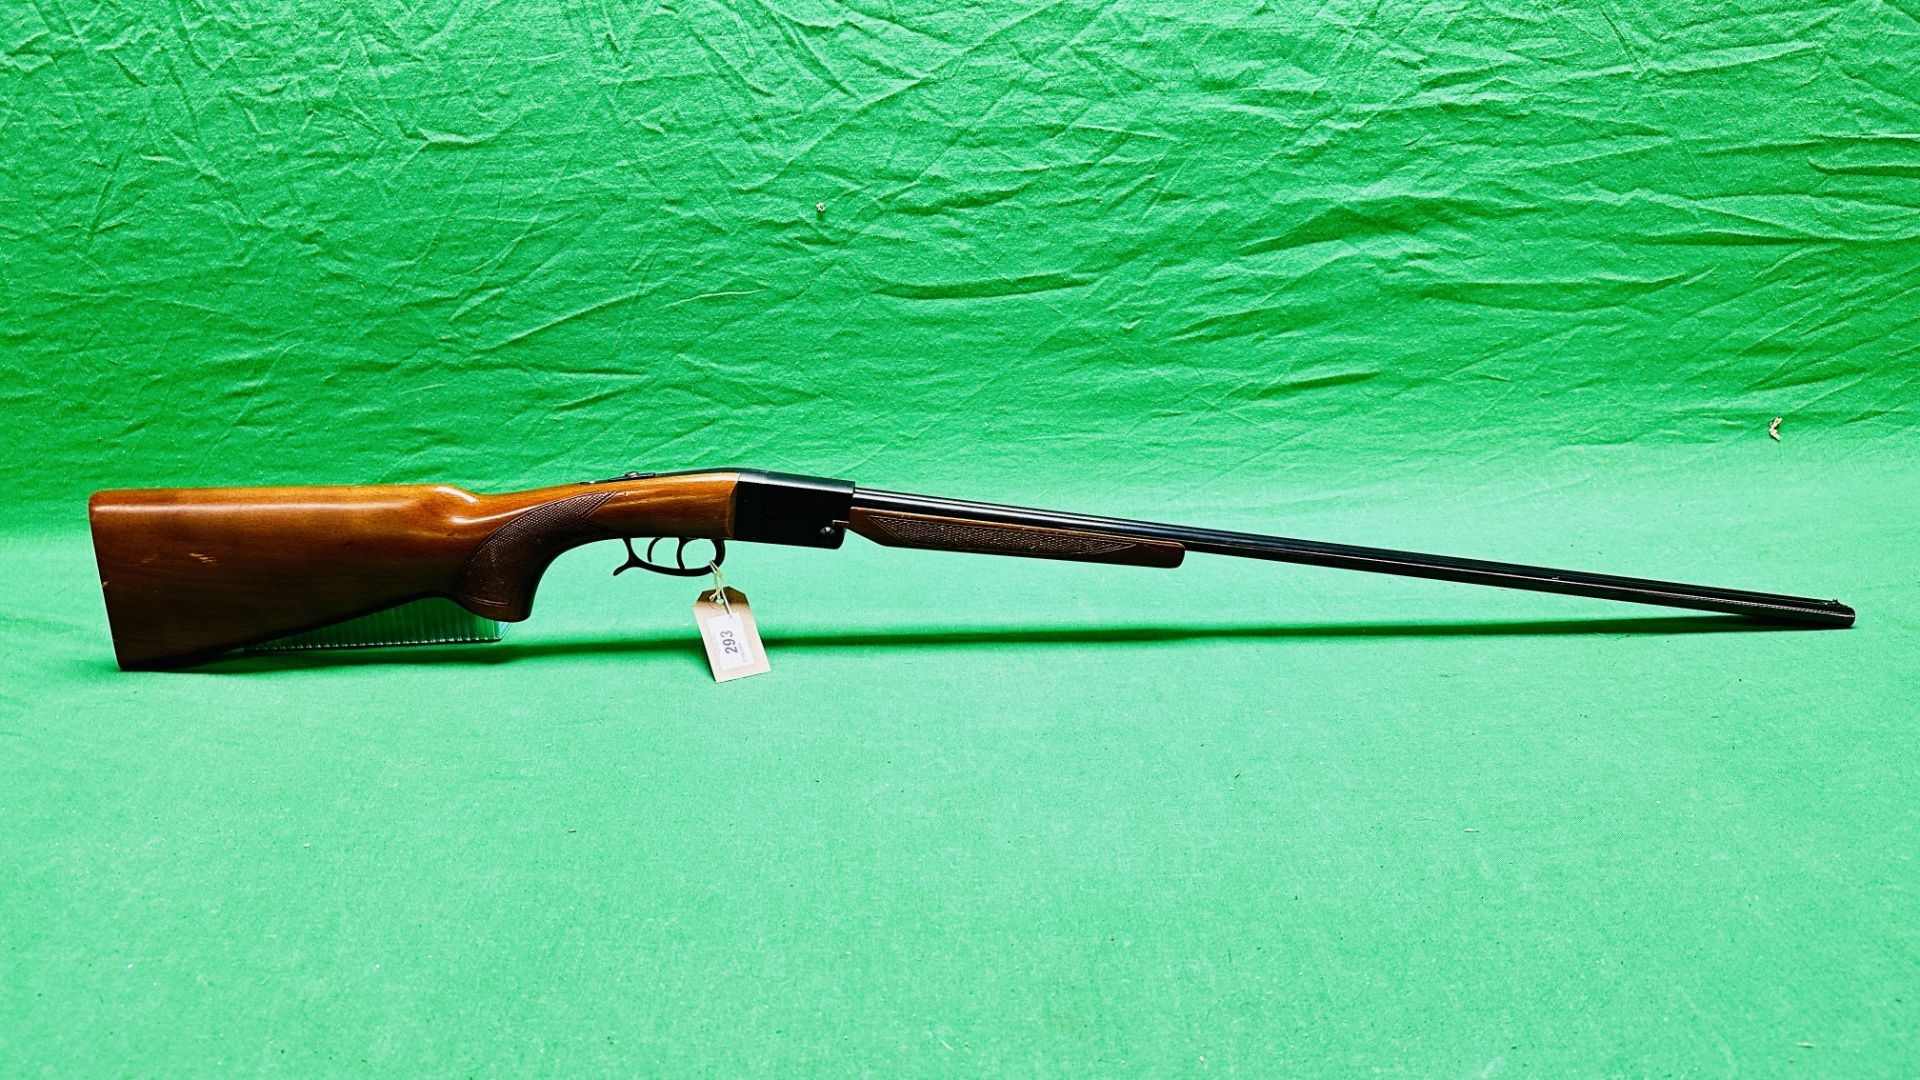 LINCOLN 9MM SIDE BY SIDE SHOTGUN #A35263 - (REF: 1482) - (ALL GUNS TO BE INSPECTED AND SERVICED BY